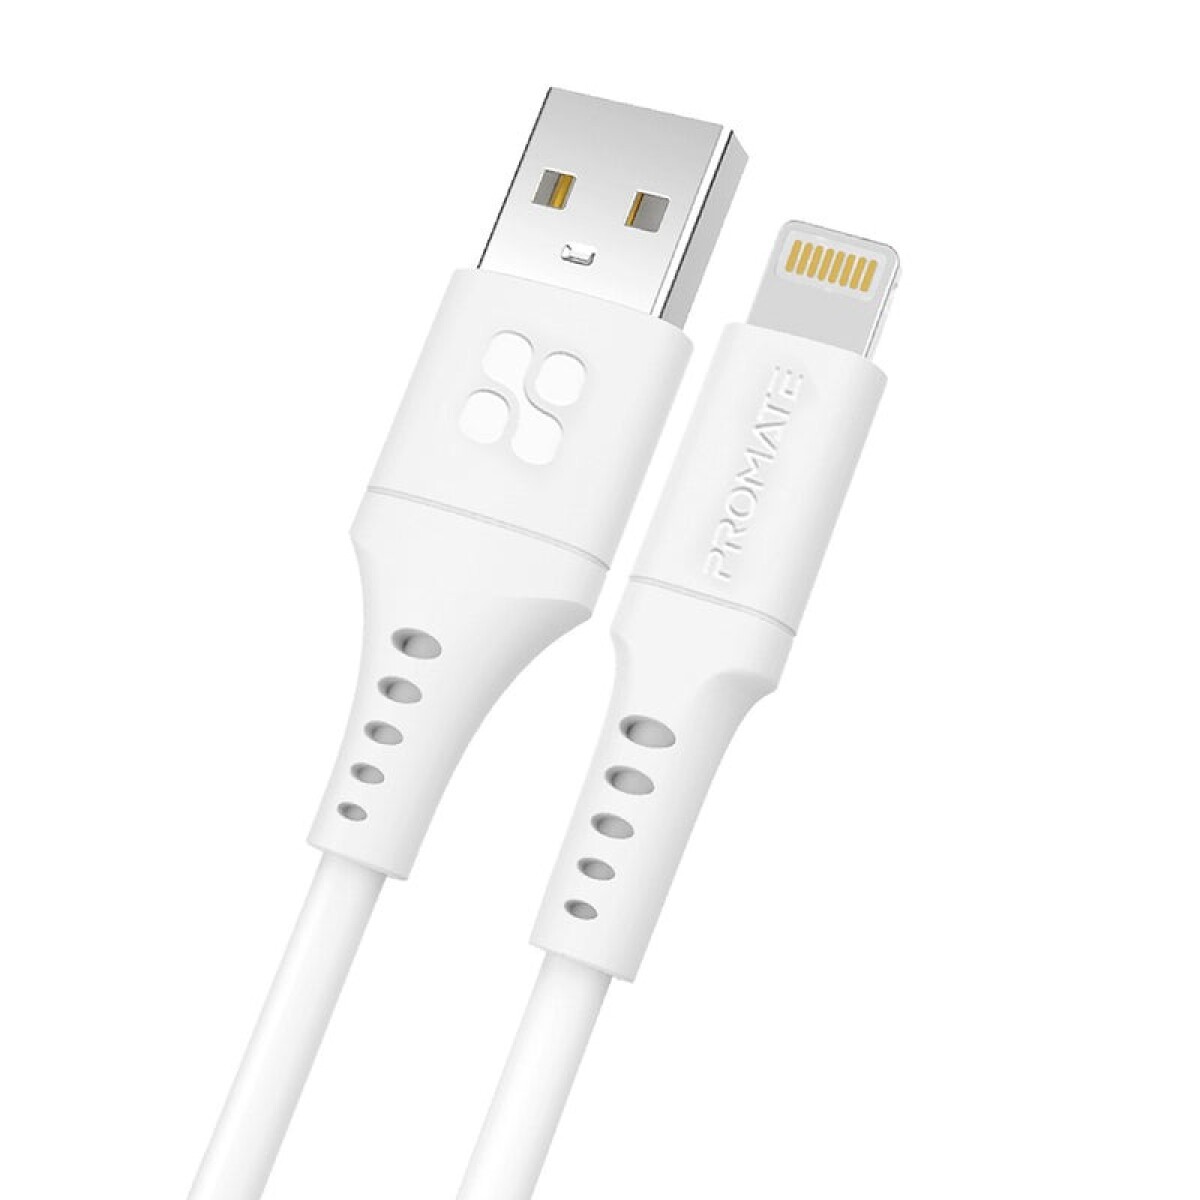 PROMATE POWERLINK-AI120.WHITE CABLE USB A LIGHTNING 1.2M - Promate Powerlink-ai120.white Cable Usb A Lightning 1.2m 